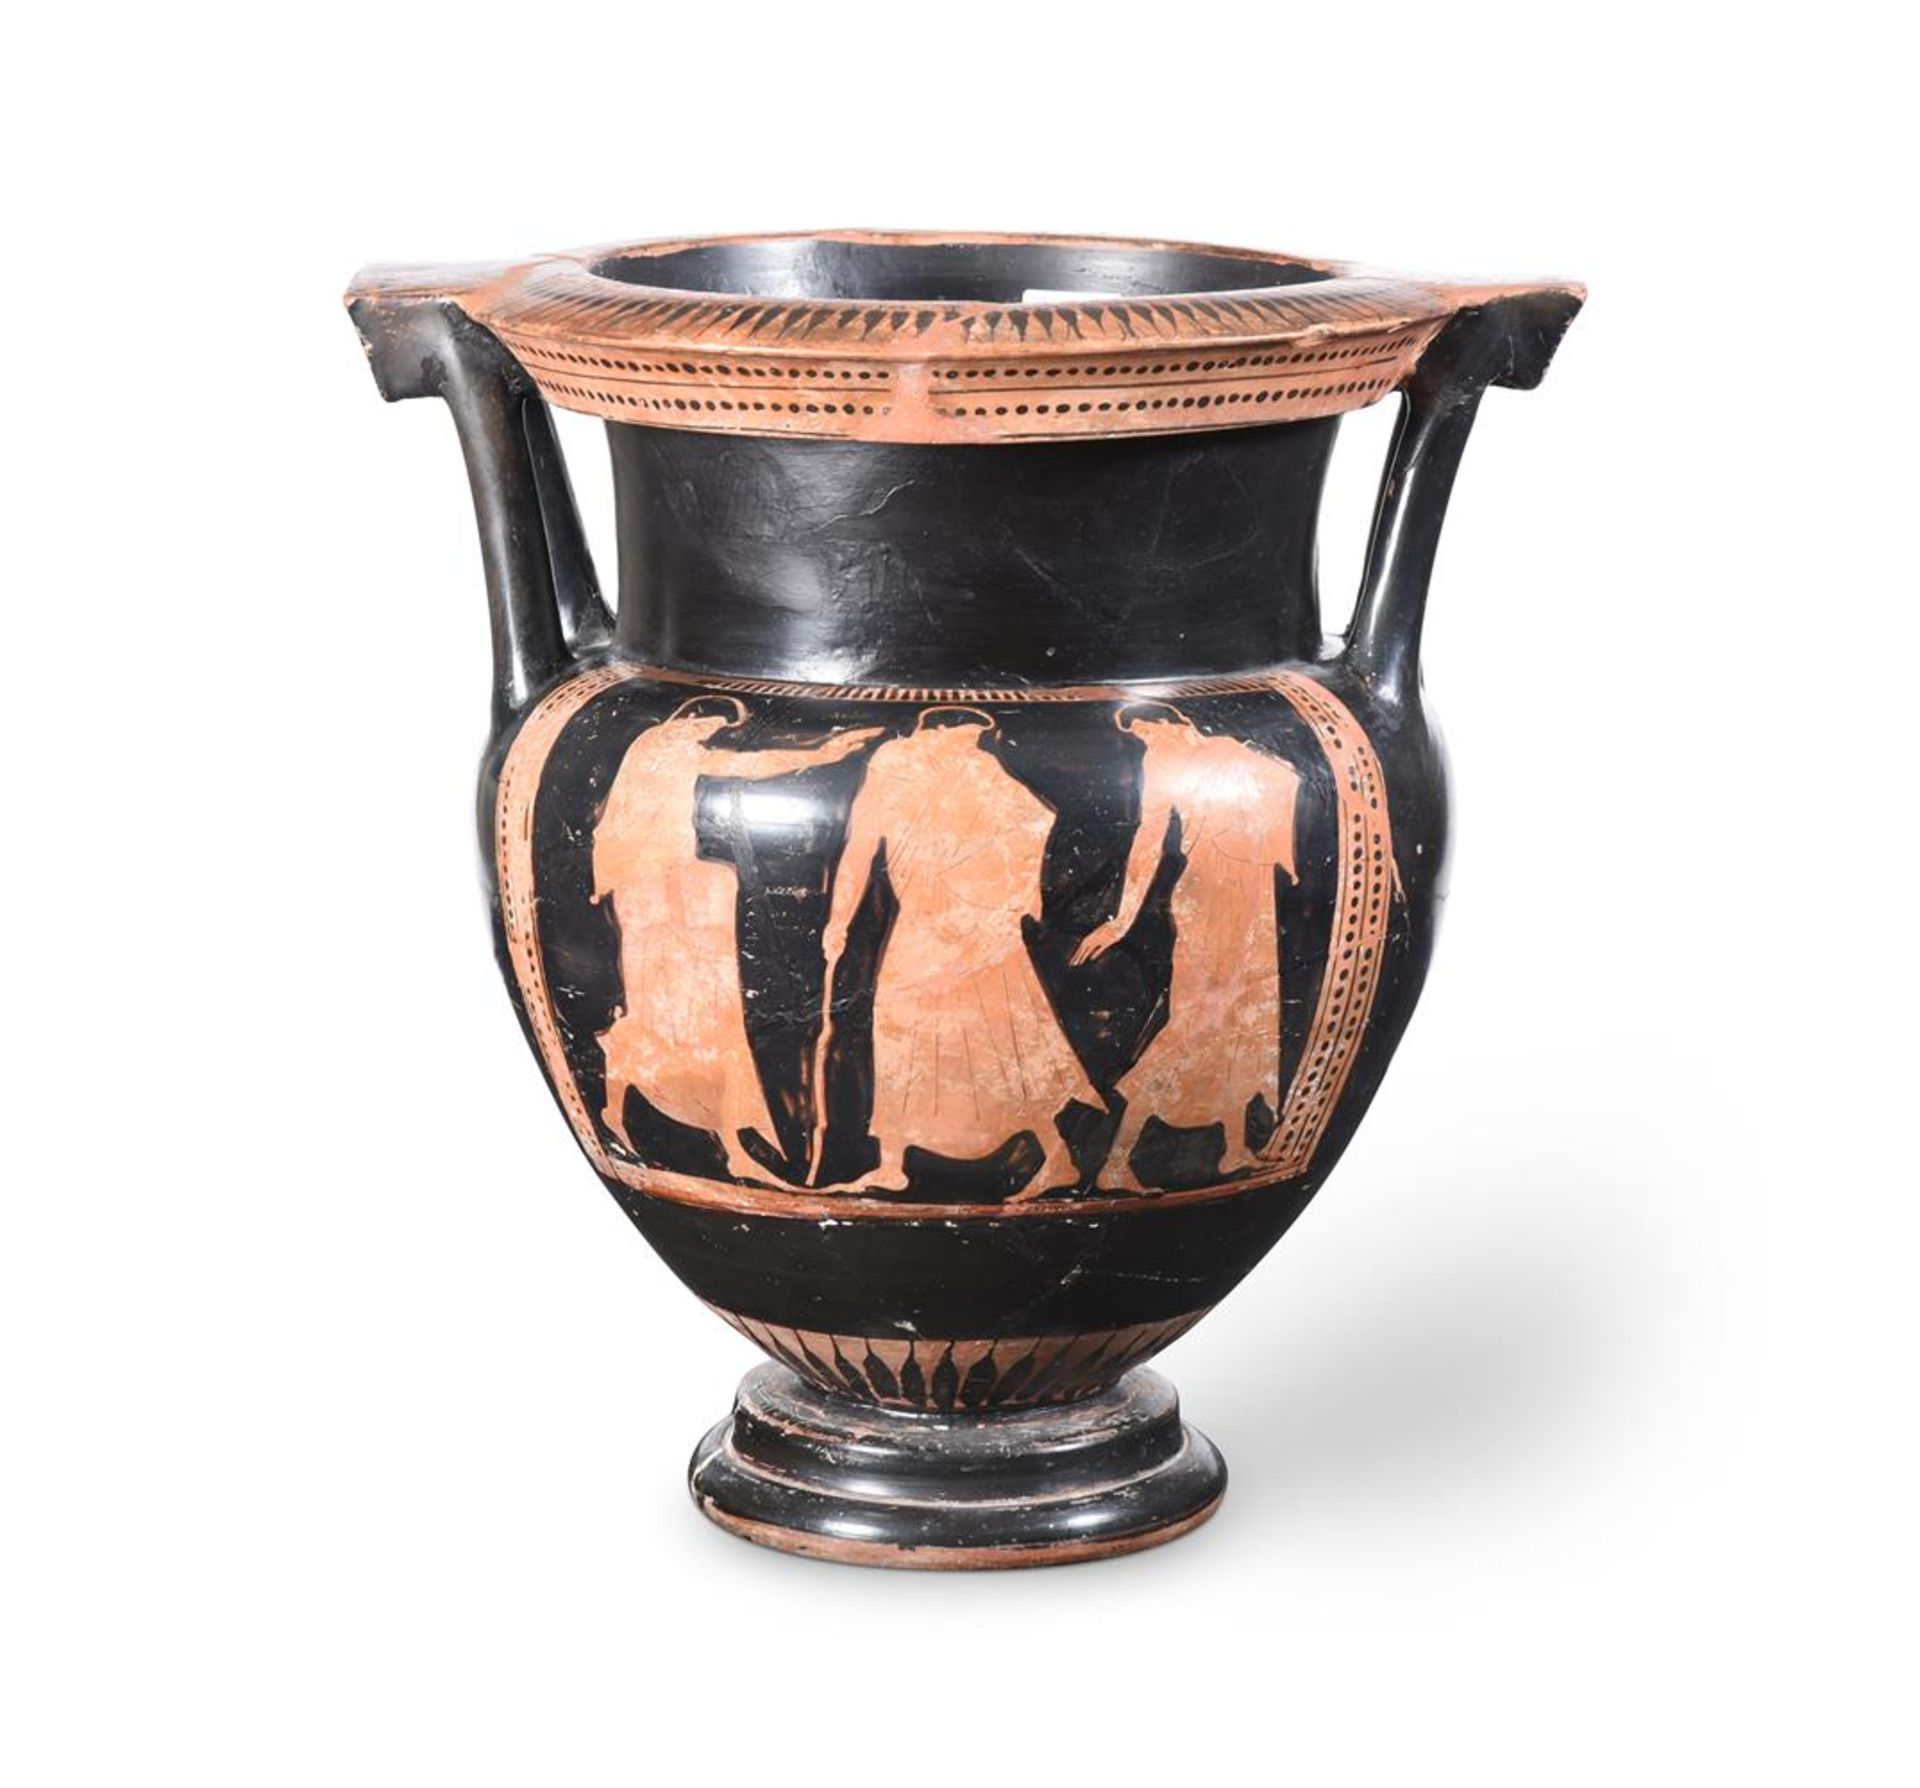 AN ATTIC RED-FIGURE COLUMN KRATER, ATTRIBUTED TO THE LENINGRAD PAINTER, CIRCA 480-460 B.C.